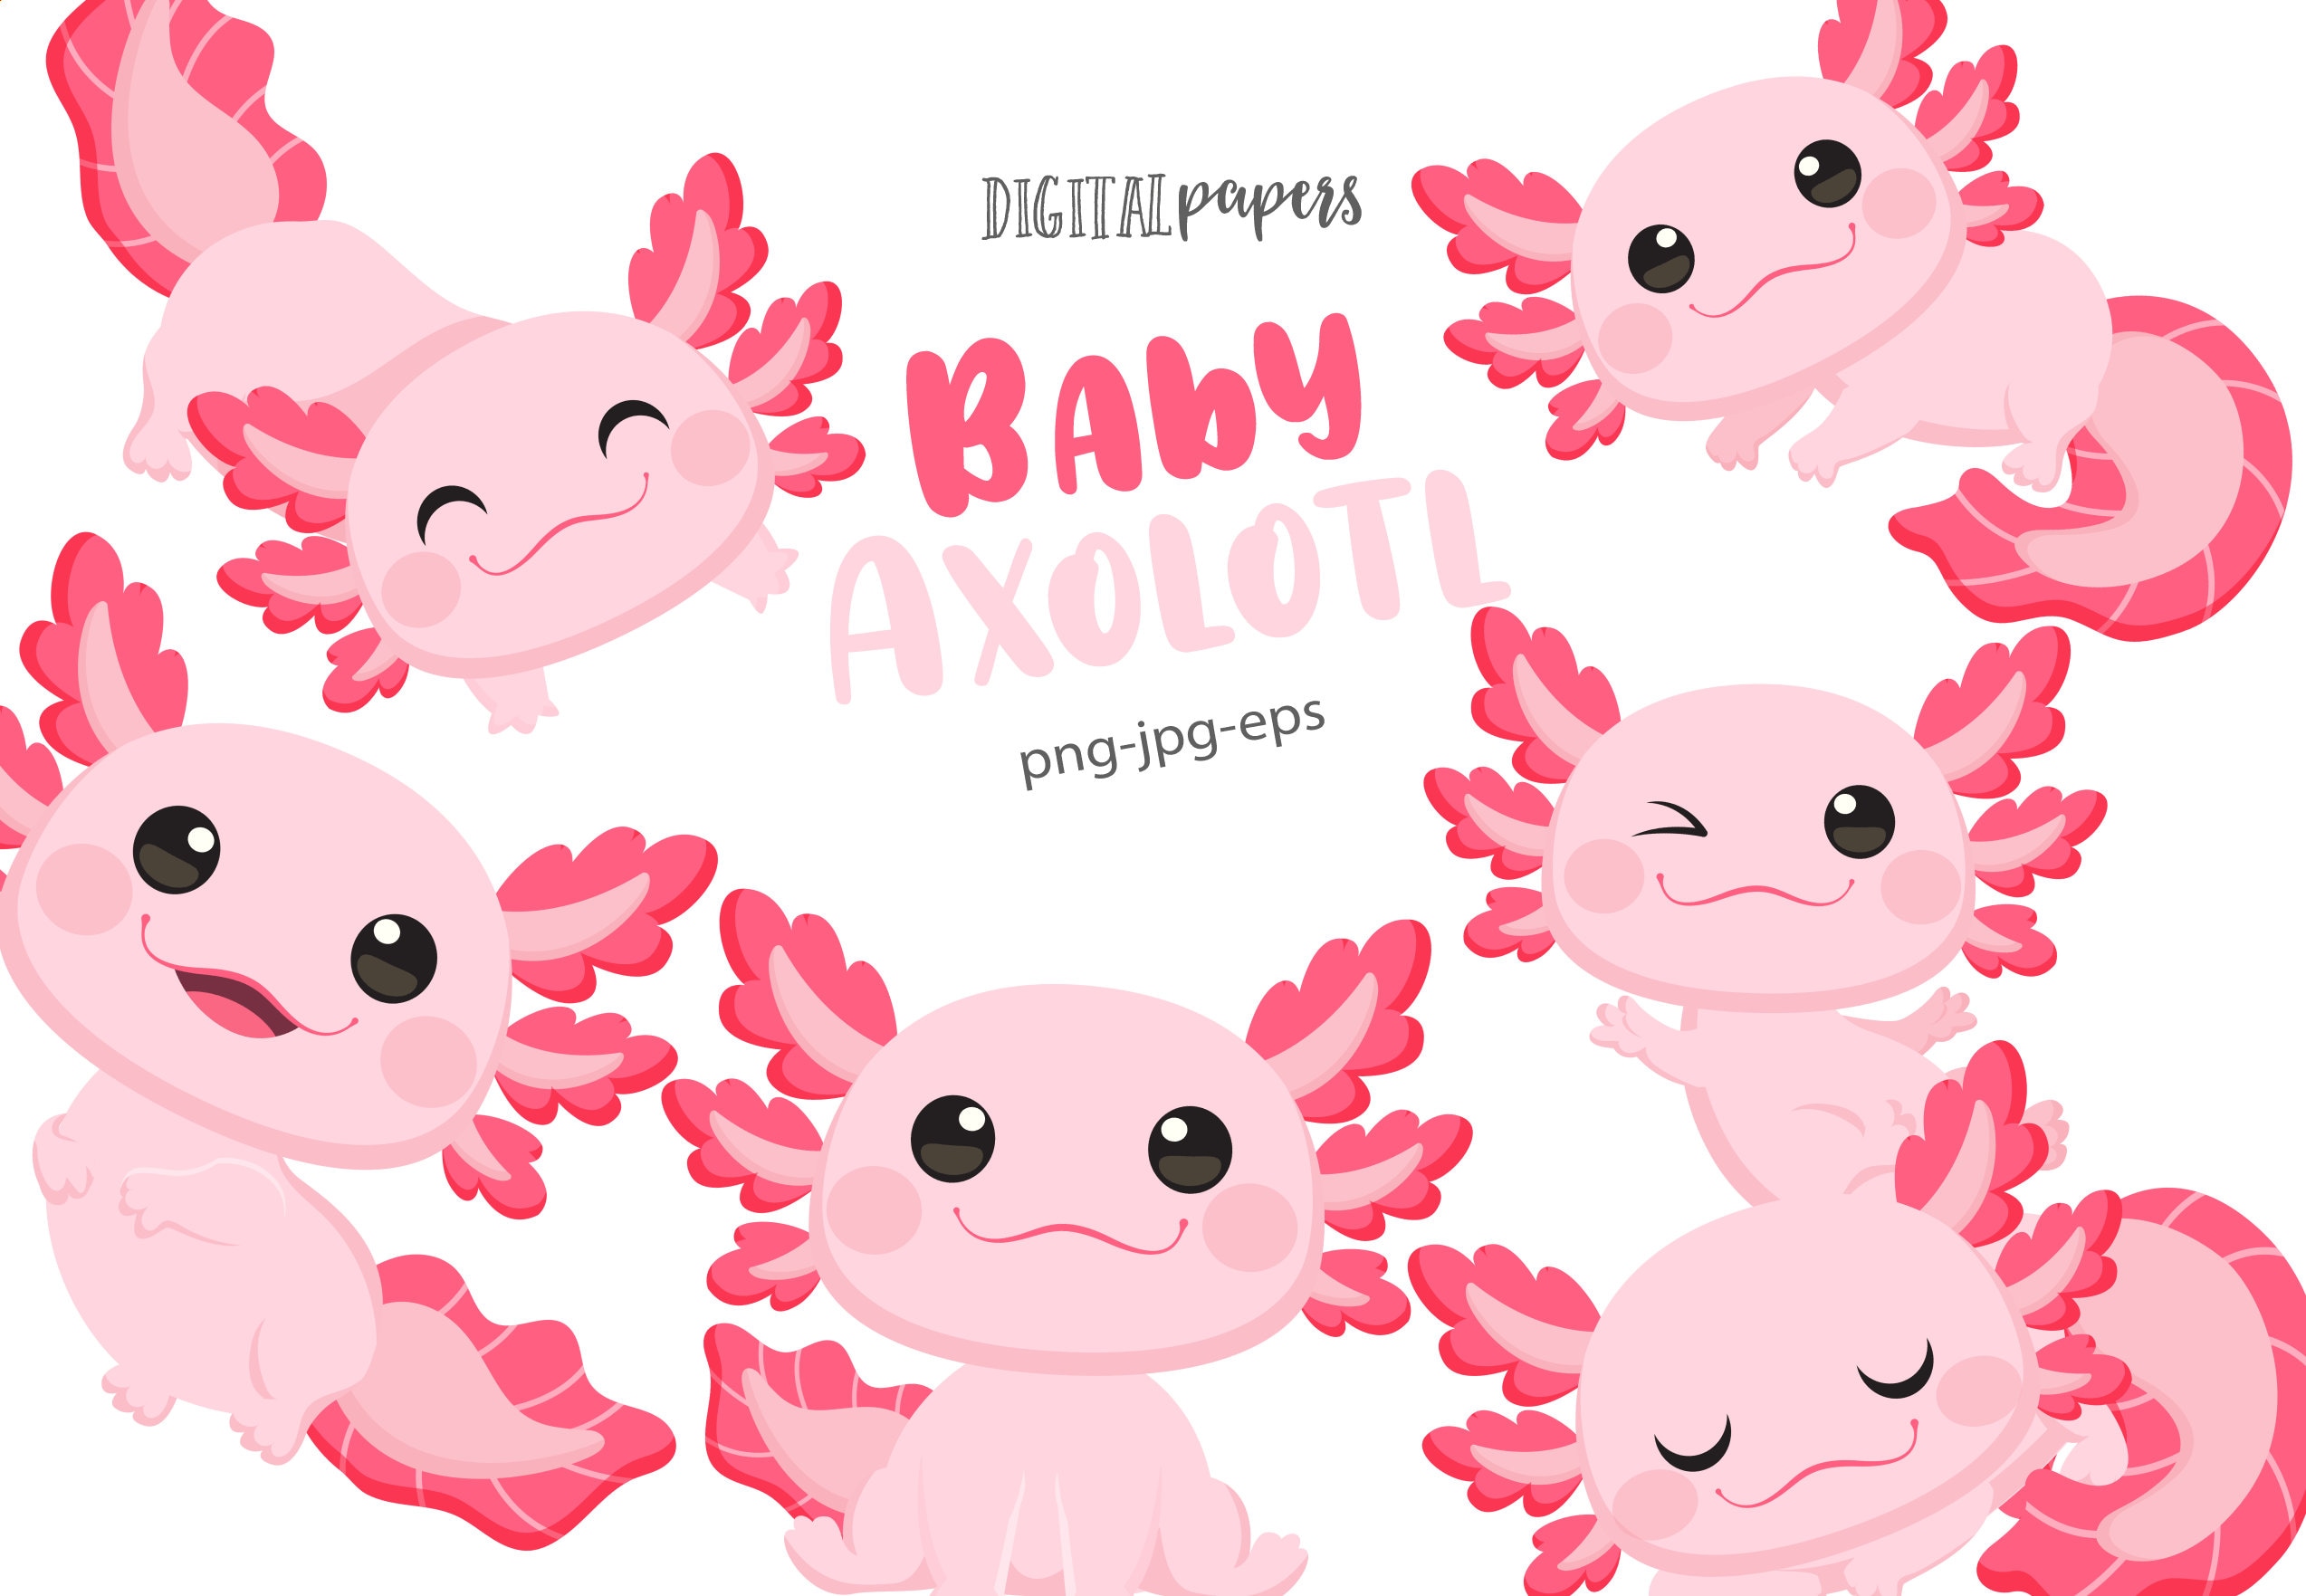 Axolotl Stickers – Rose and Fawn